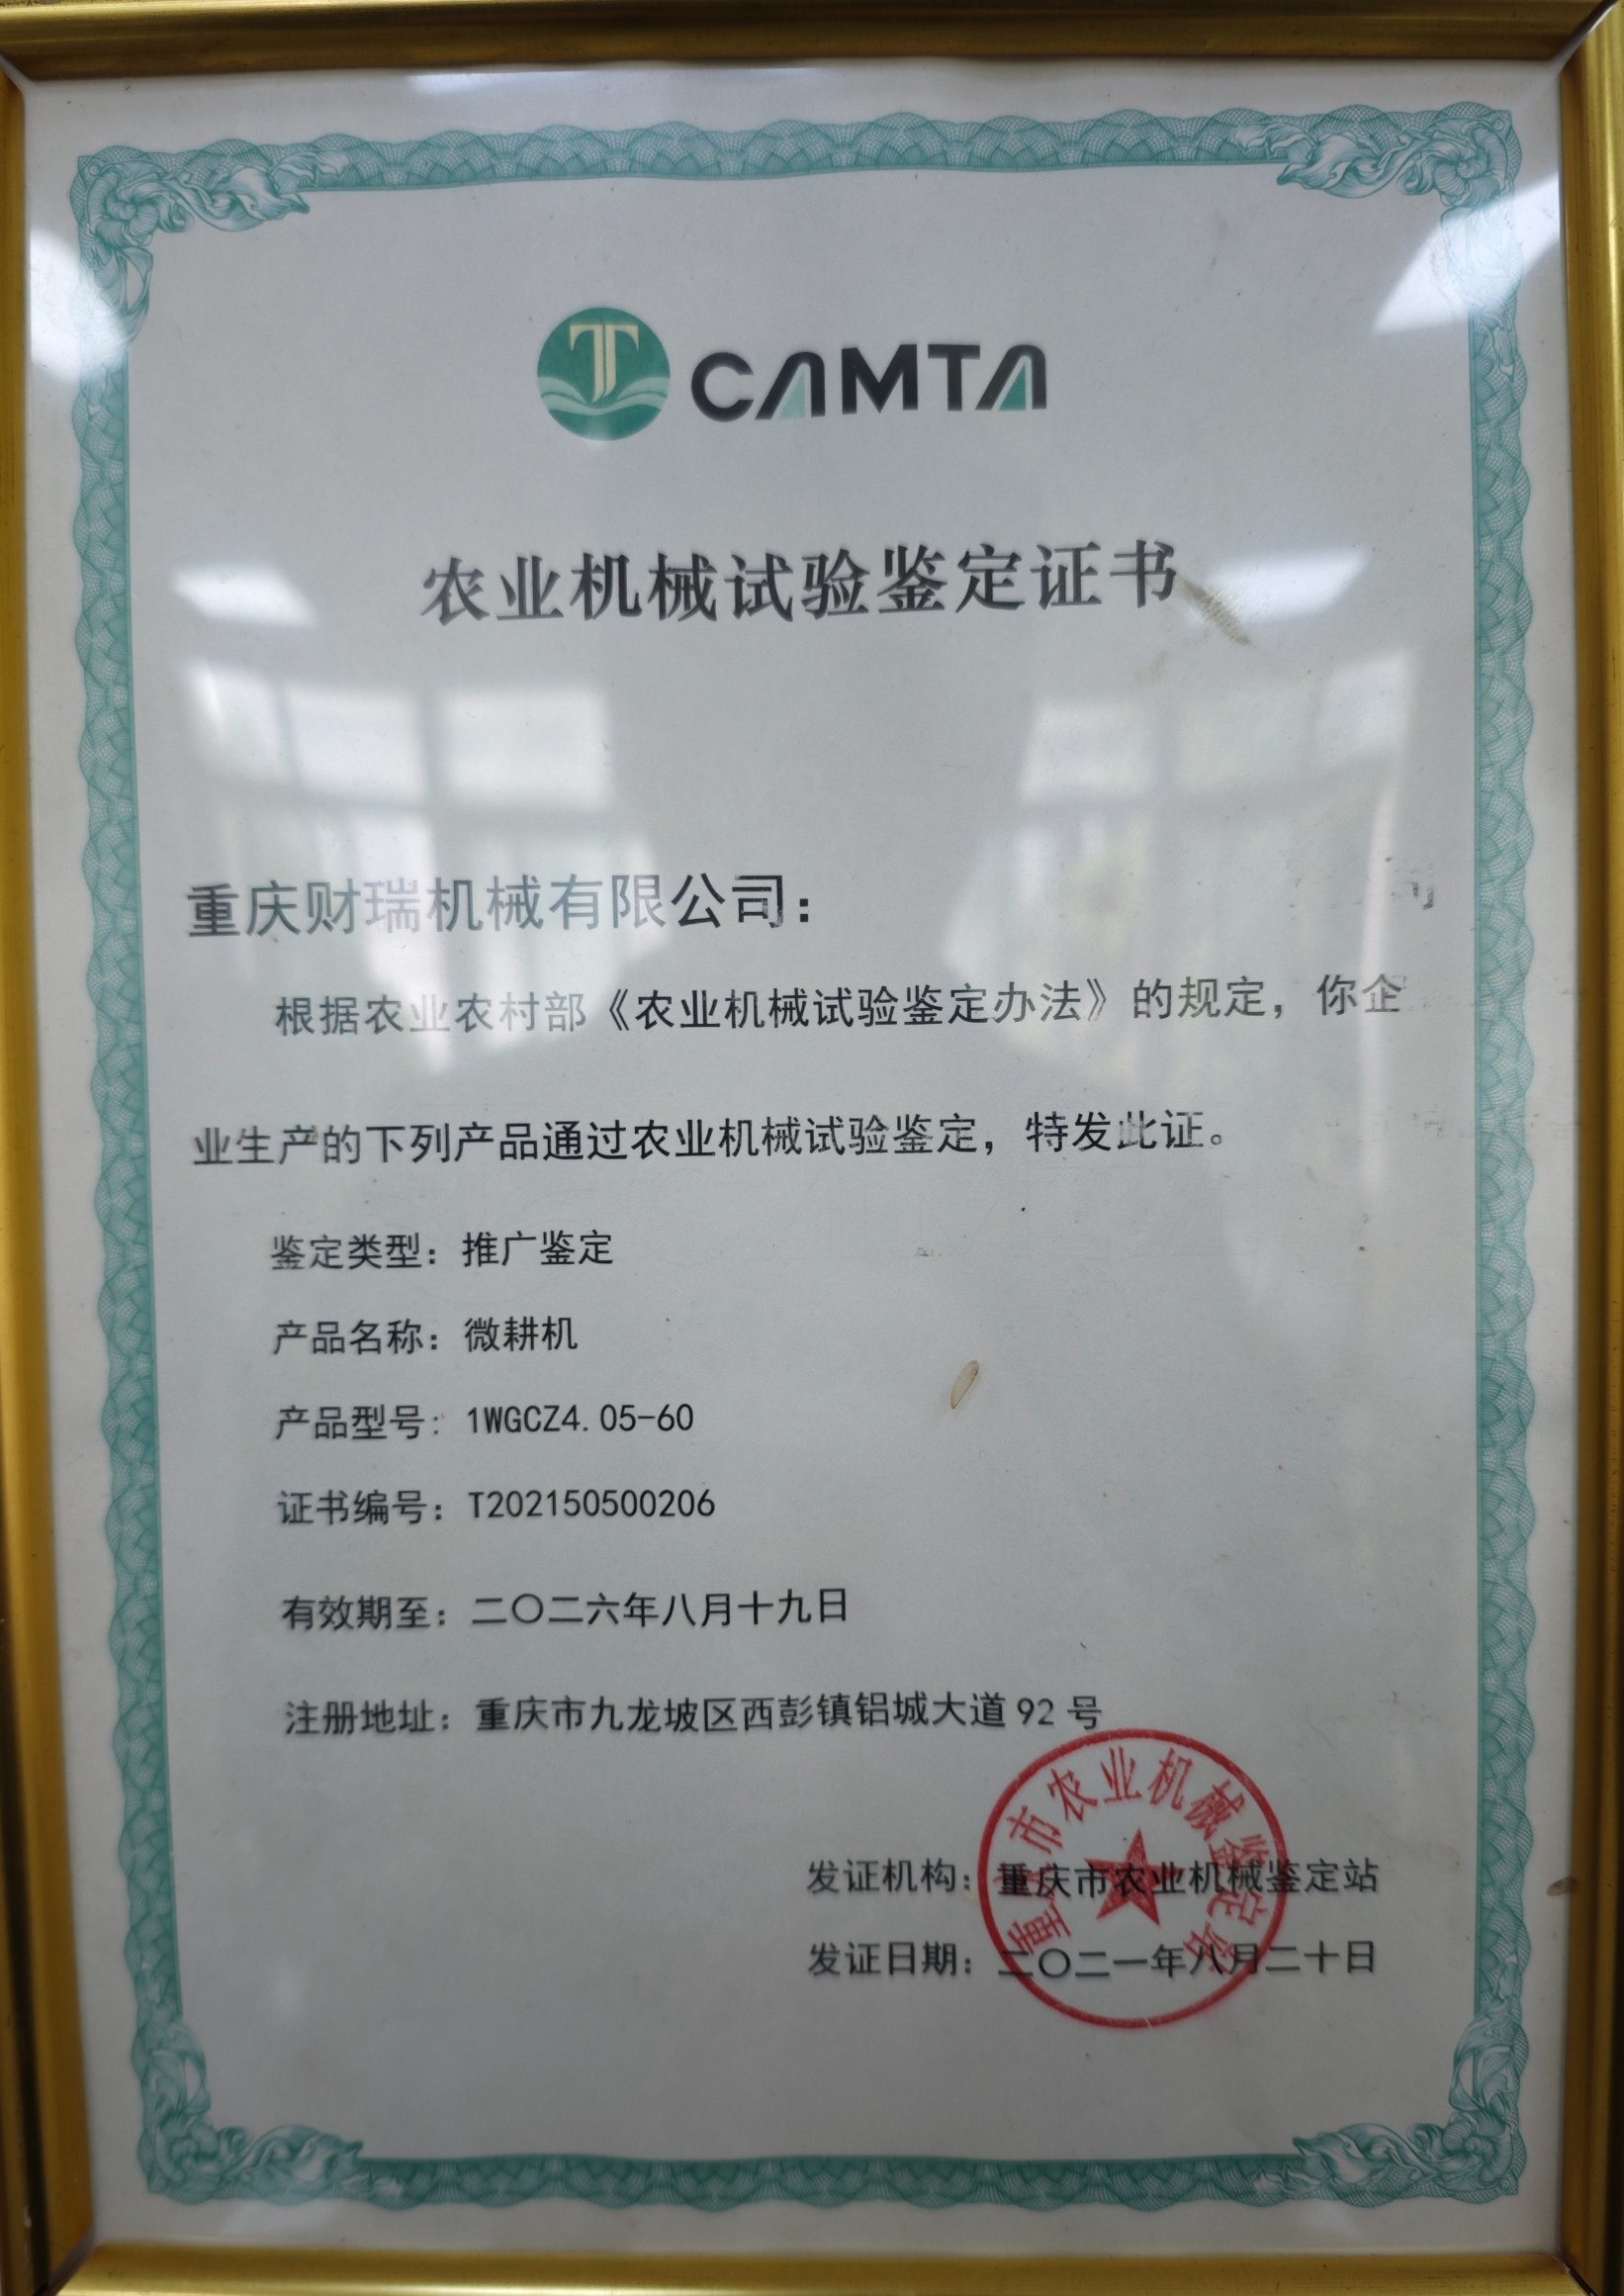 Agricultural machinery test and appraisal certificate